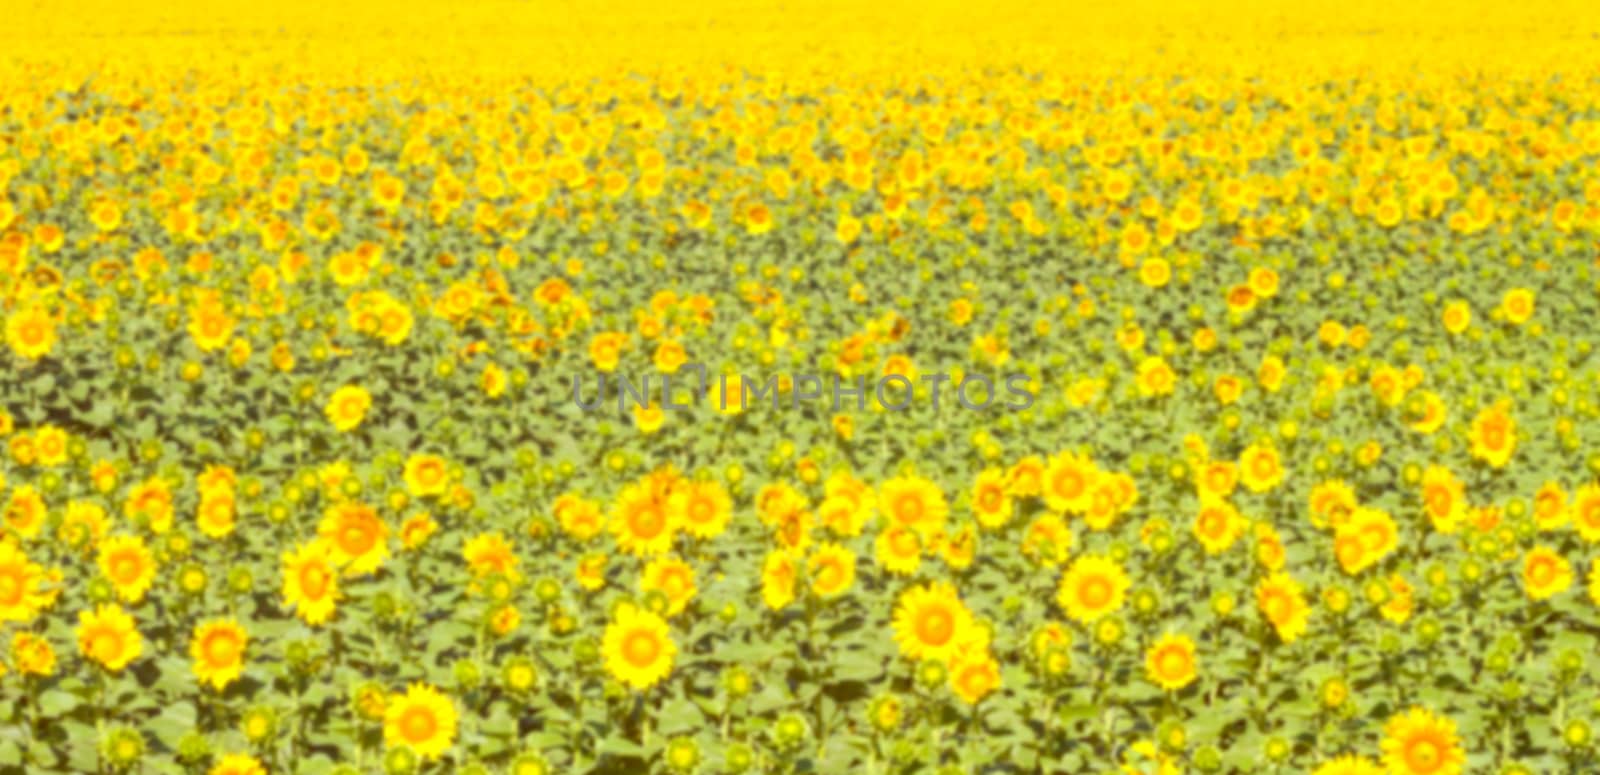 blurred field of sunflowers can be used as background